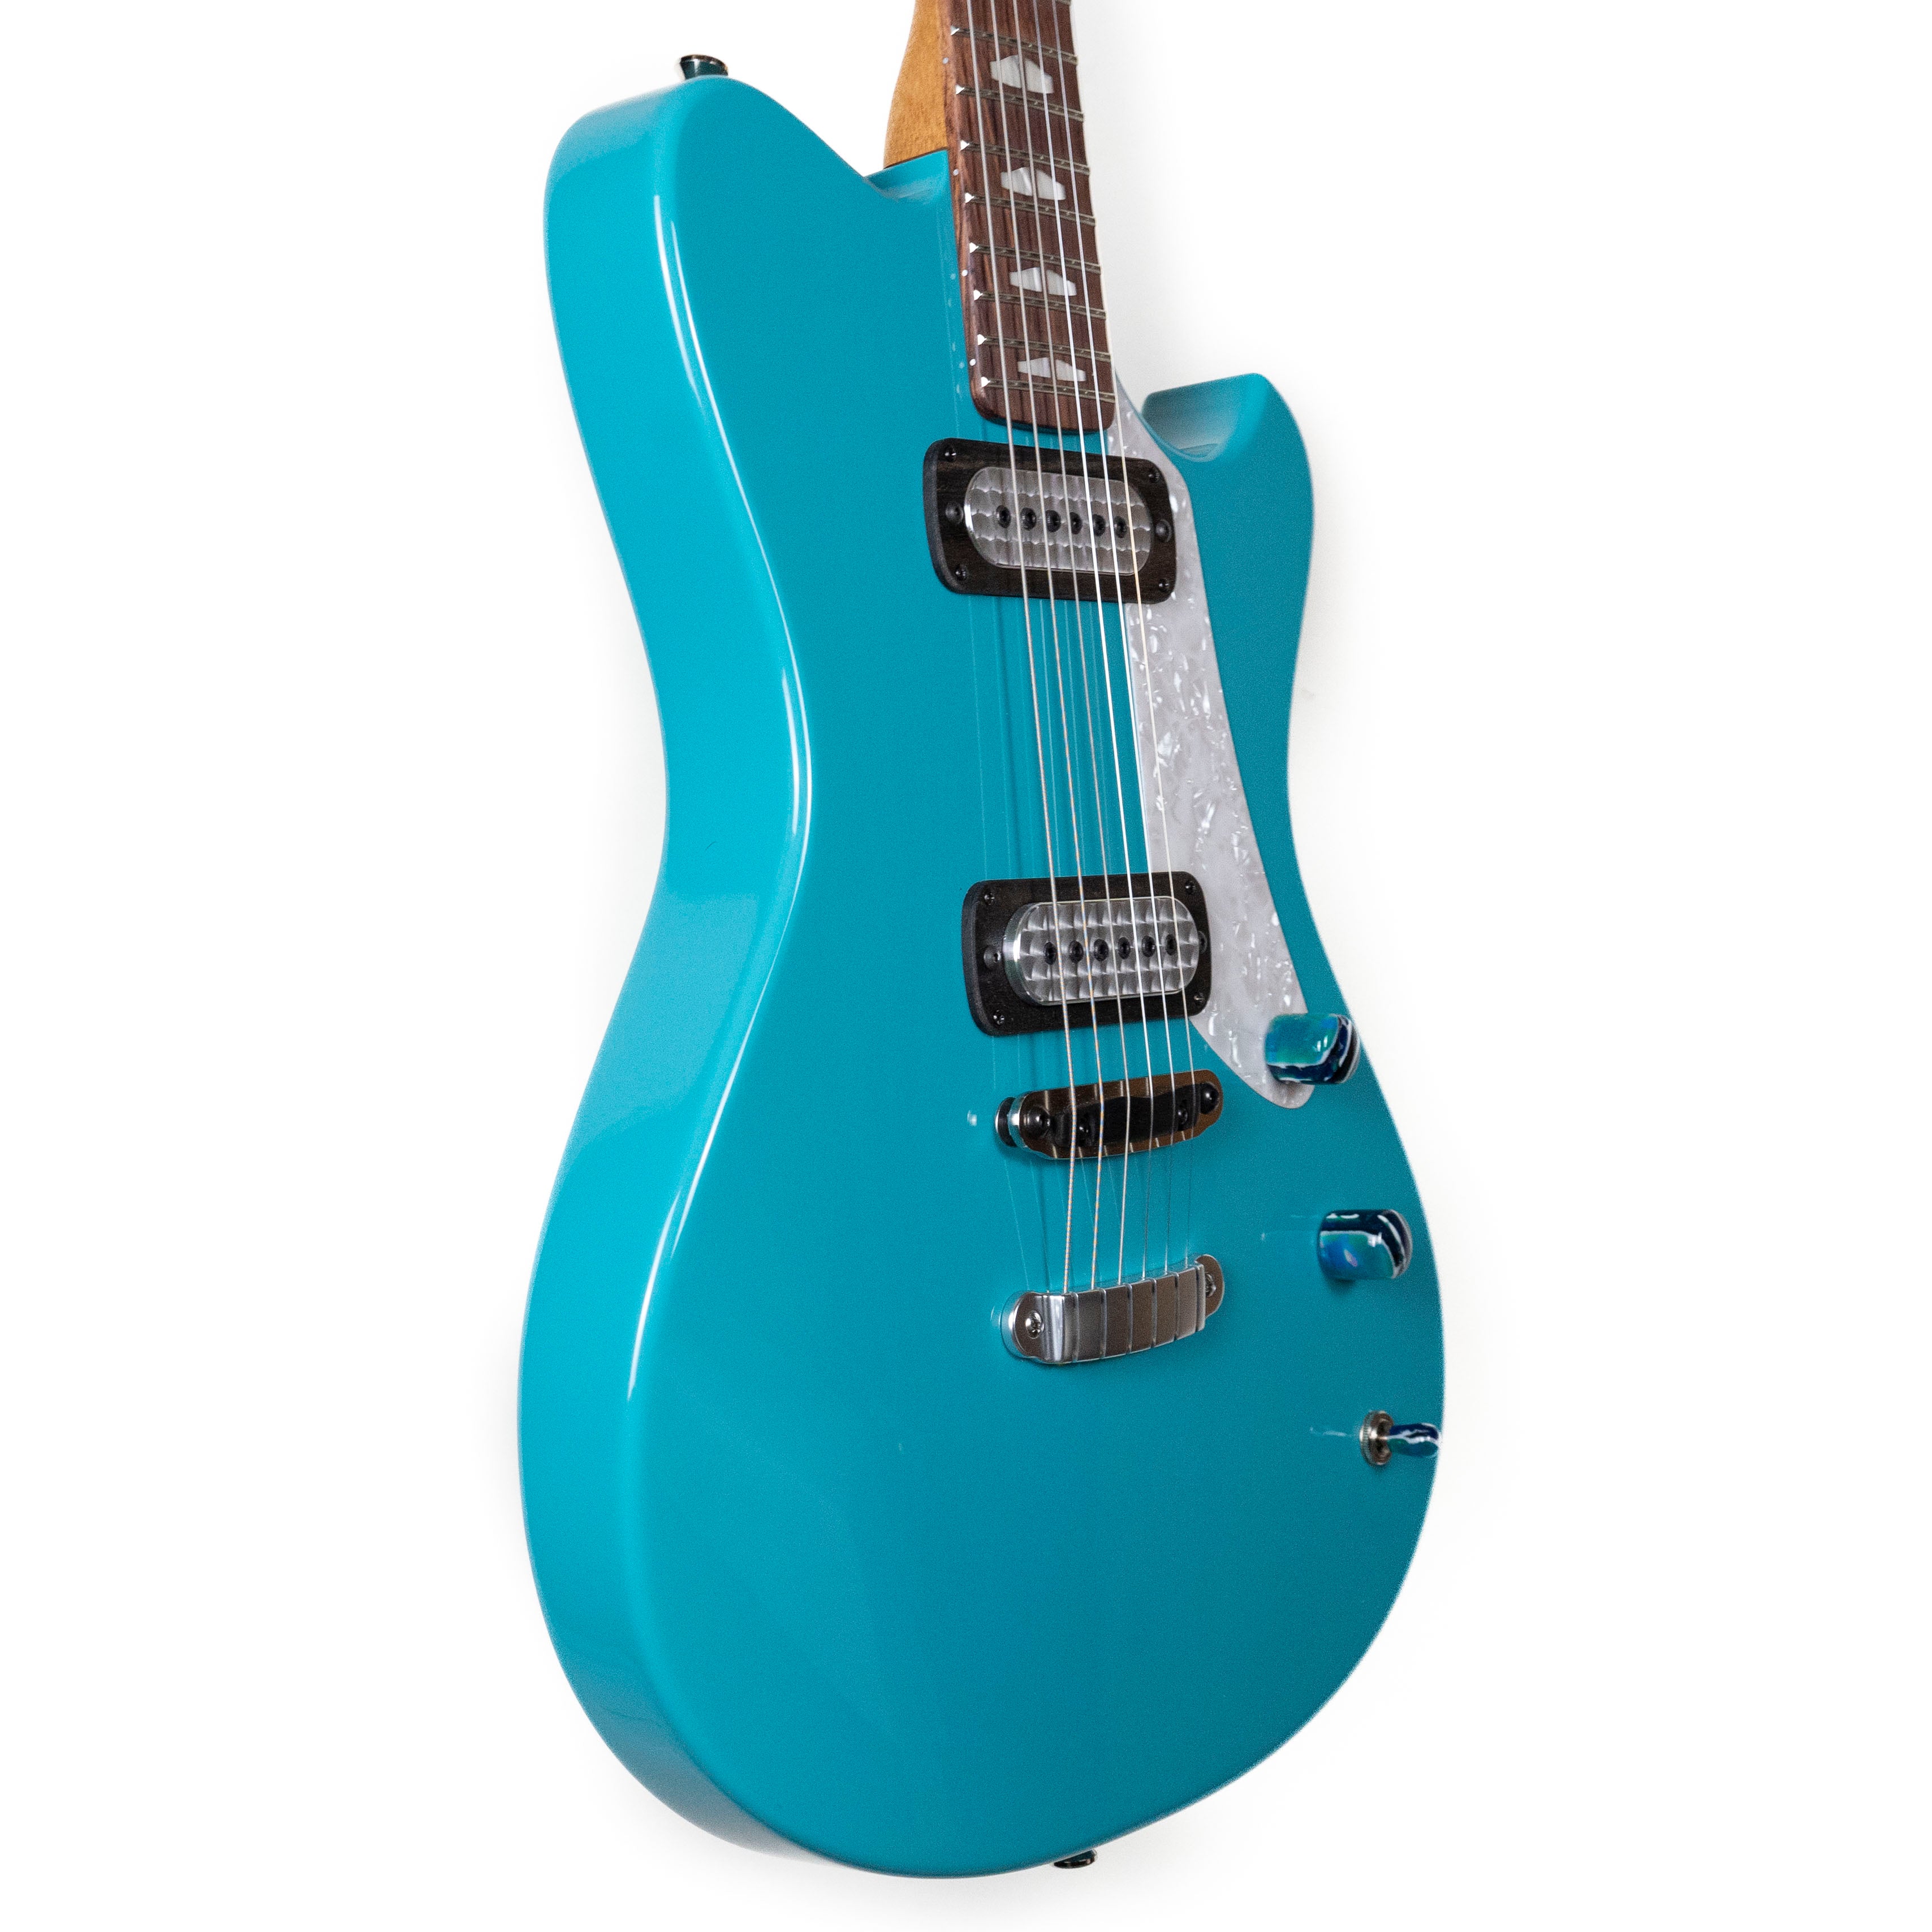 Powers A-Type Hardtail Tropical Turquoise